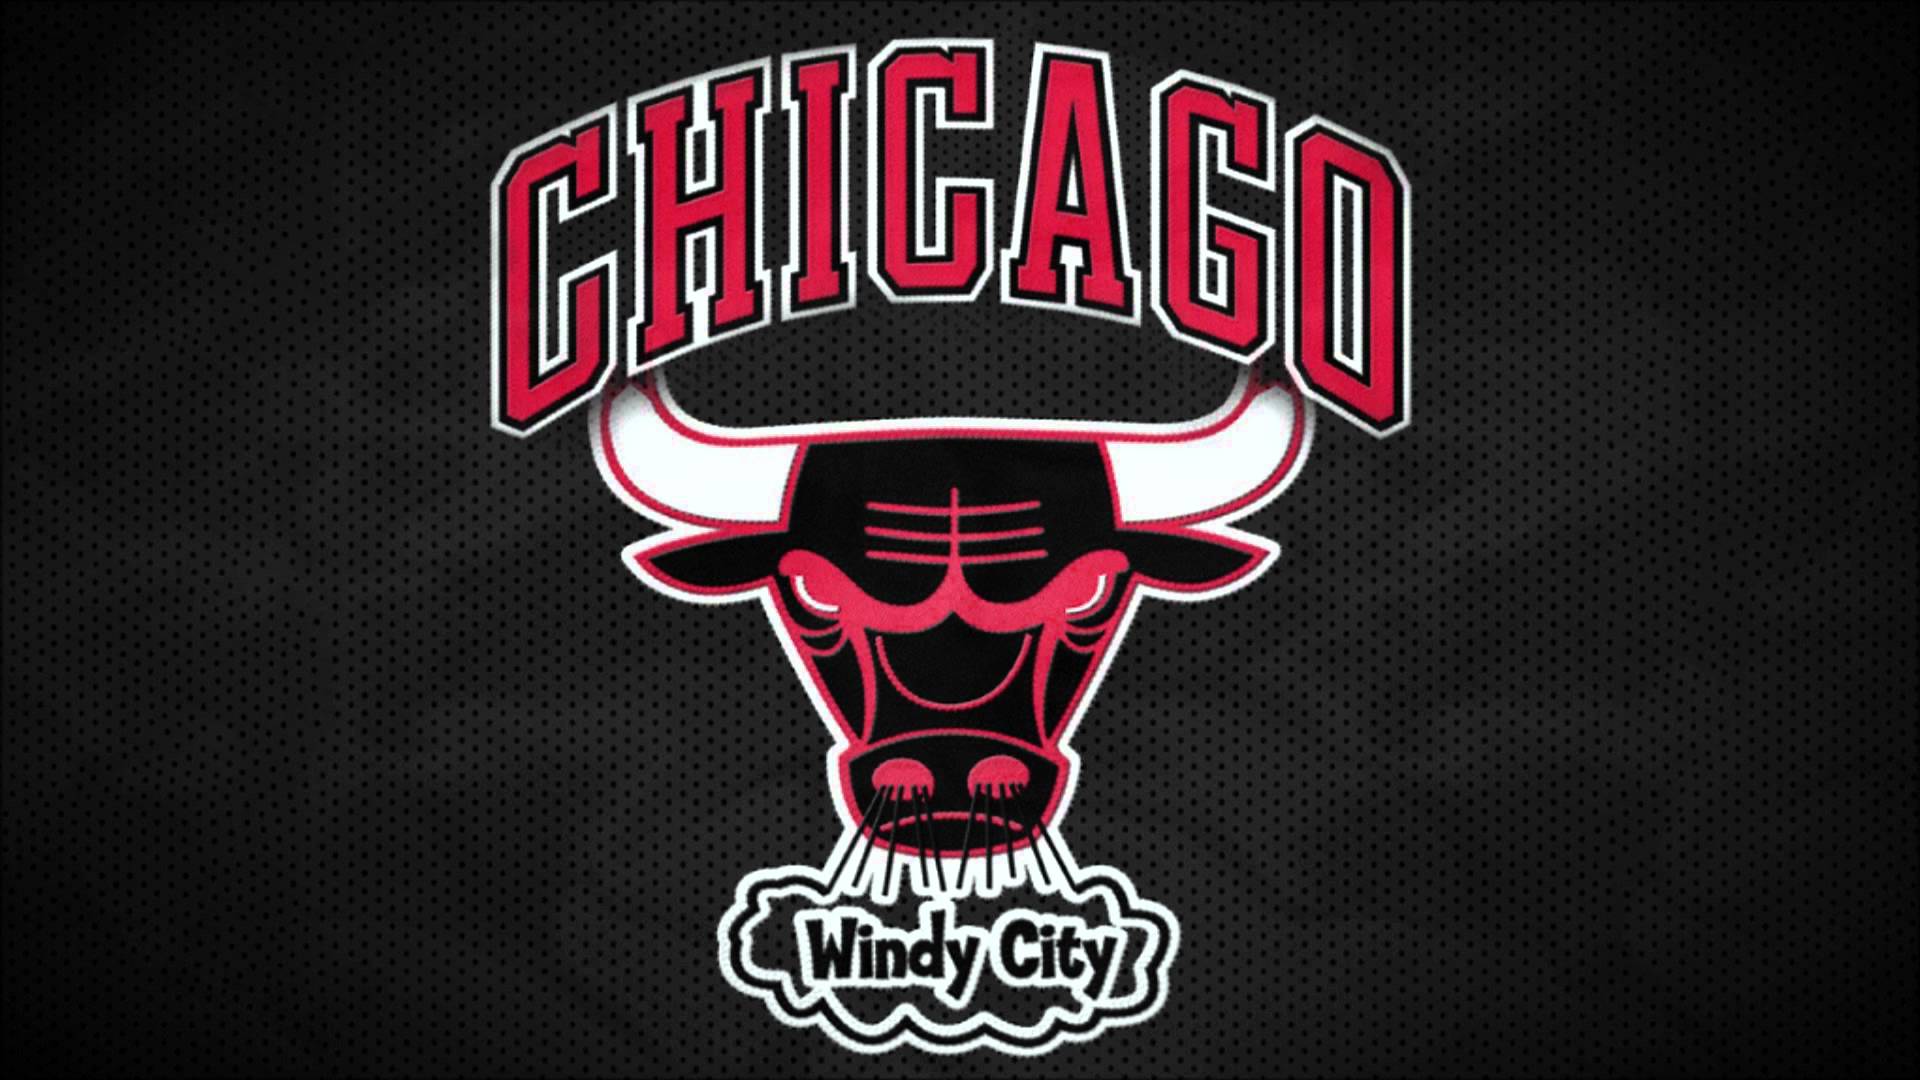 Amazing Chicago Bulls Pictures & Backgrounds